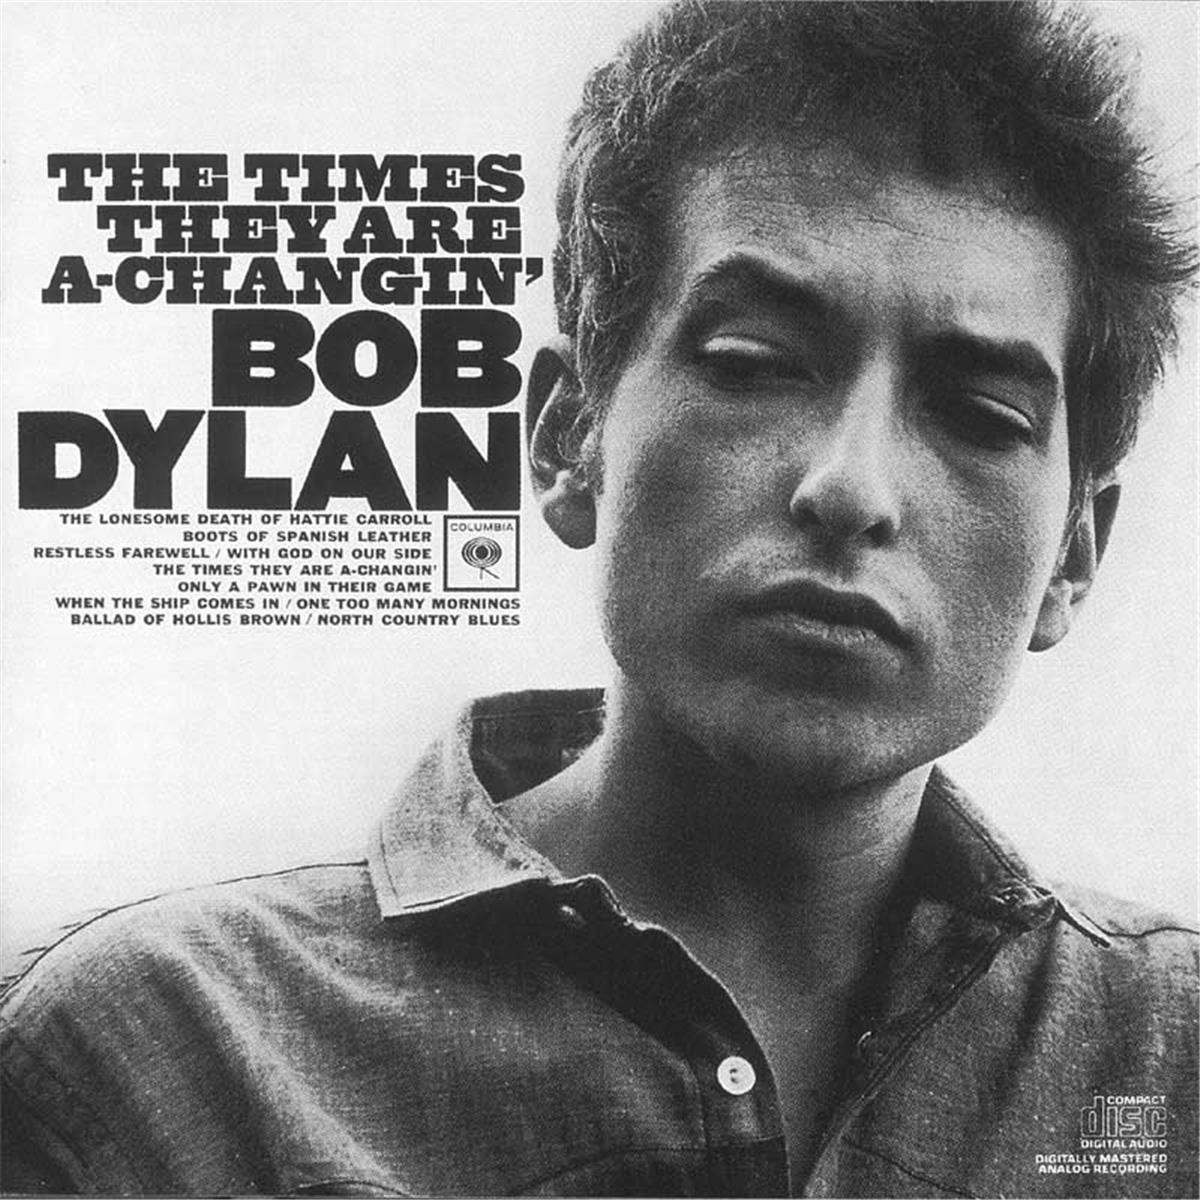 Bob Dylan（“The Times They Are A-Changin”，專輯封面）